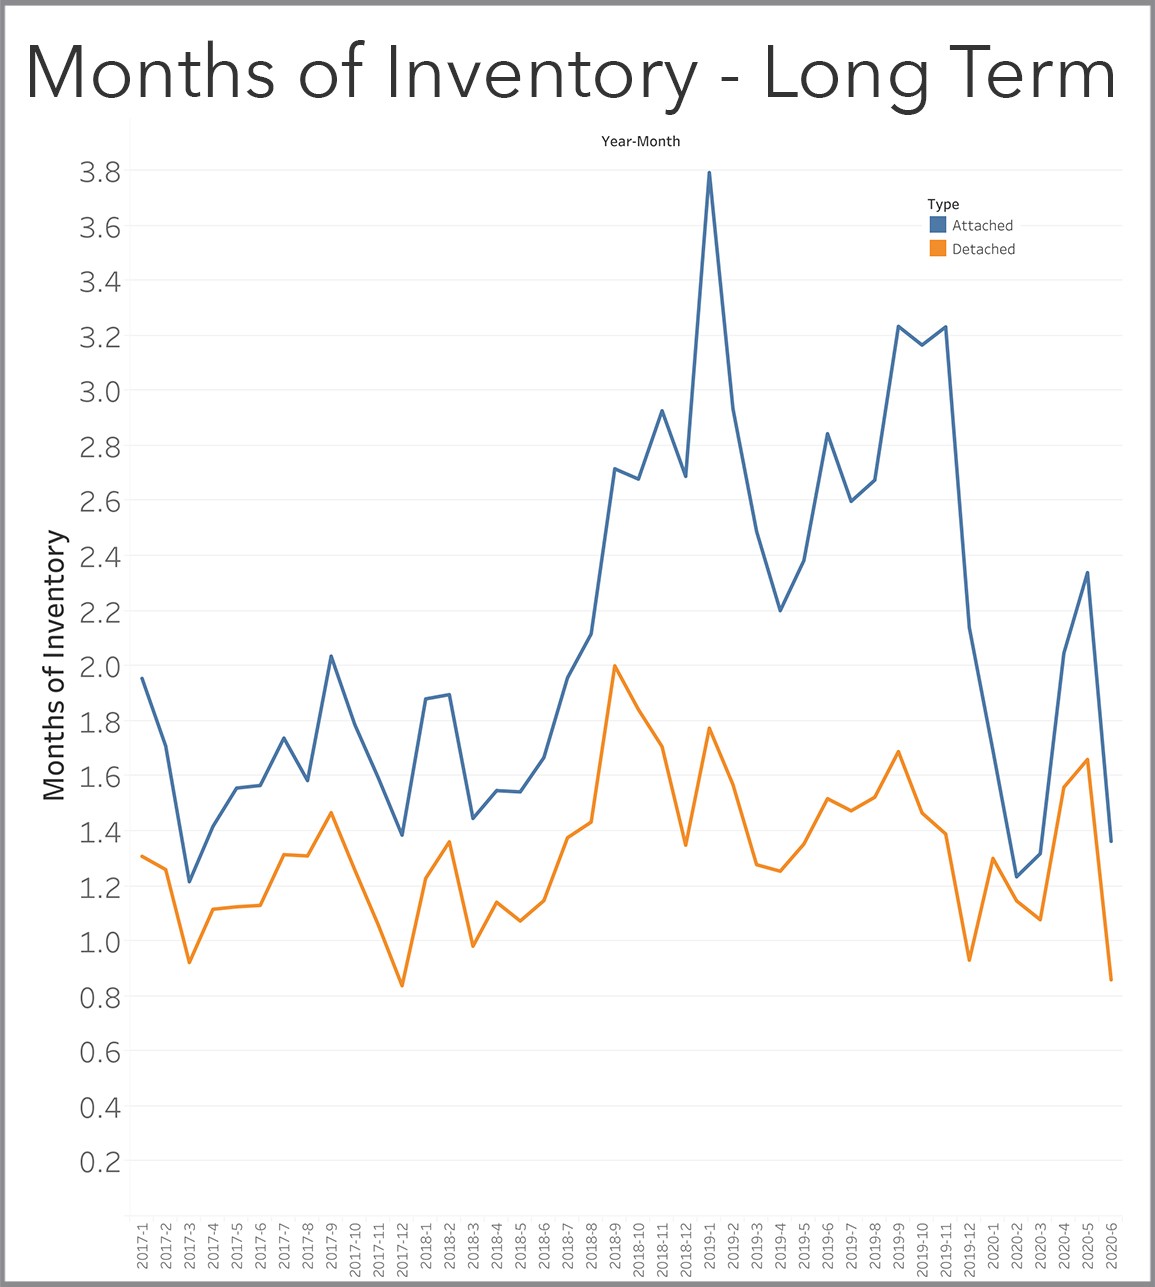 Months of Inventory - Long Term